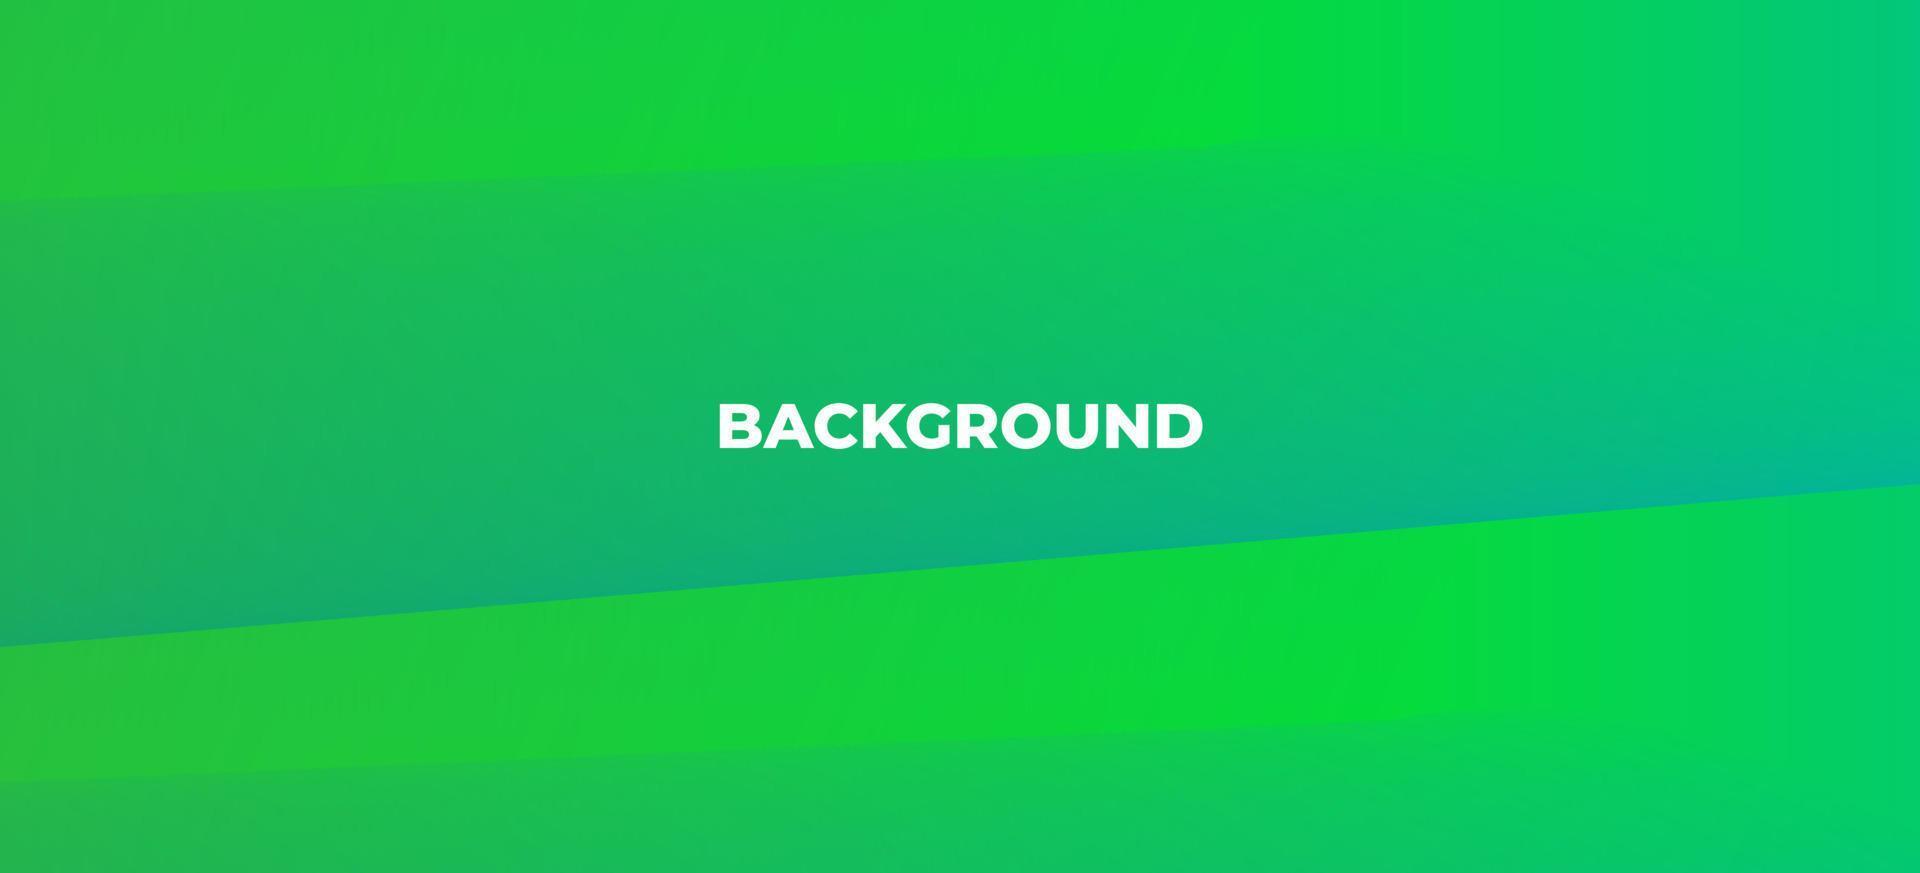 Green color background free vector